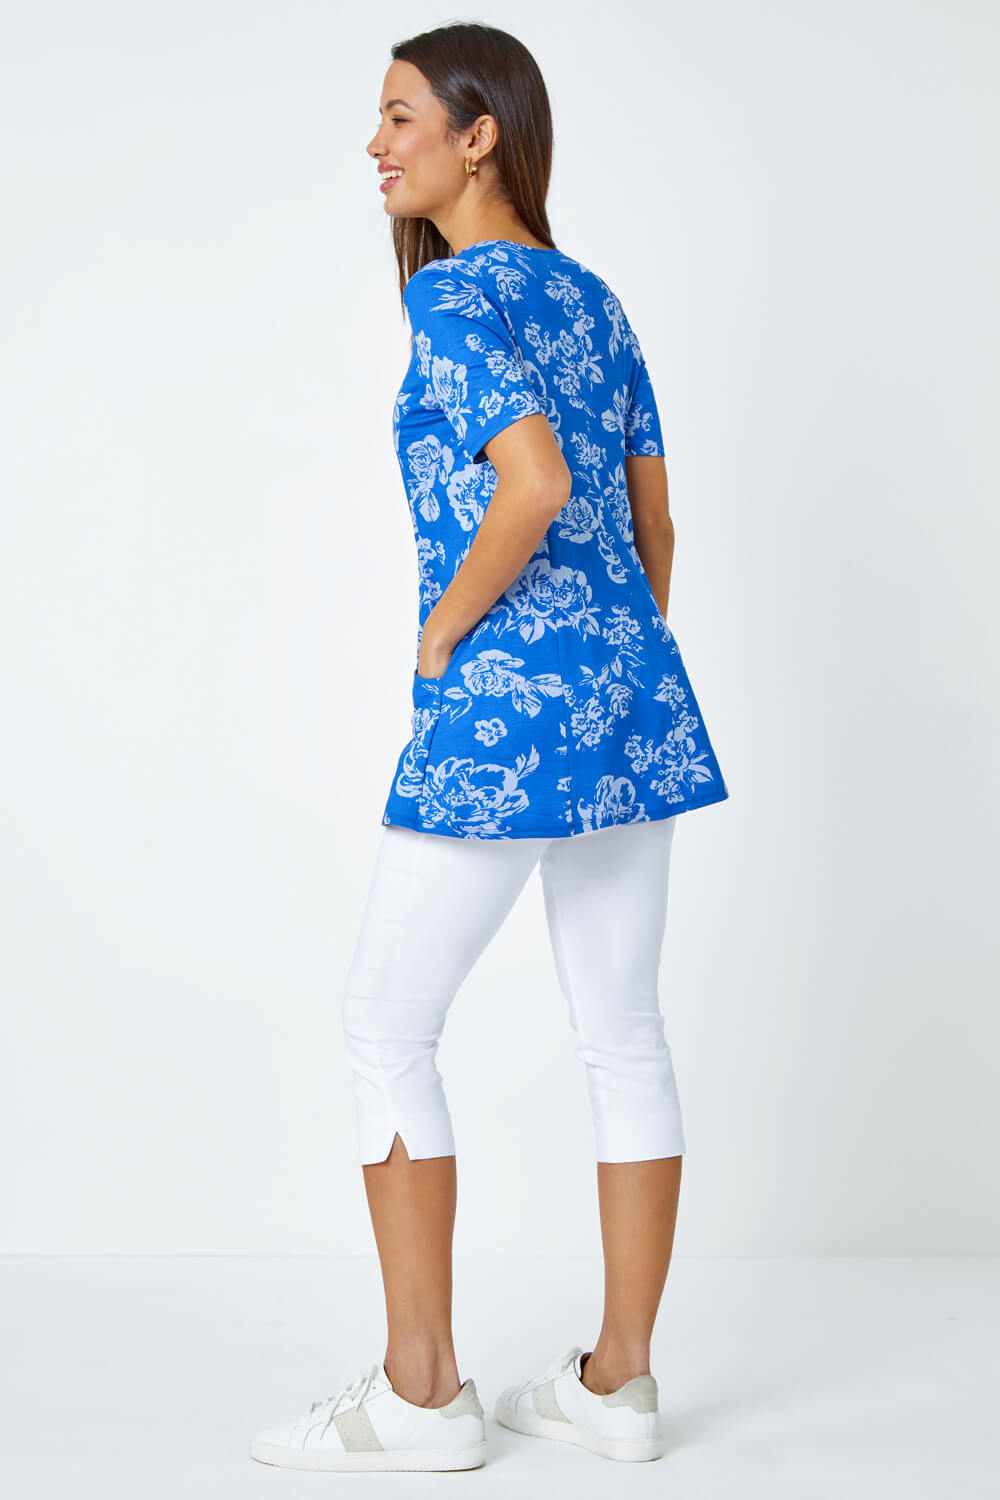 Blue Floral Print Stretch Tunic Pocket Top, Image 3 of 5